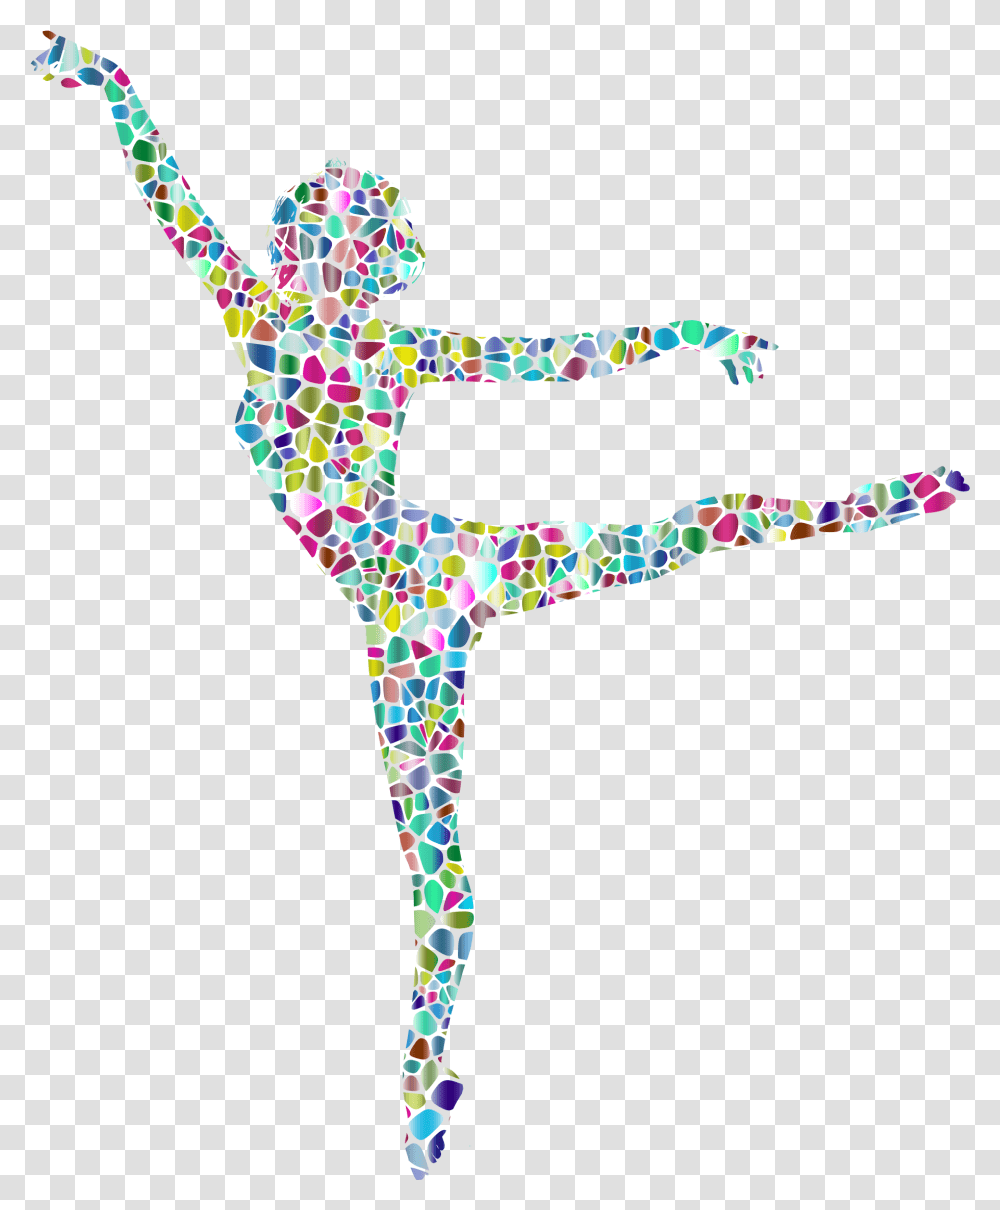 Polychromatic Tiled Lithe Dancing Woman Dancer Silhouette Background, Cross, Light, Leisure Activities, Dance Pose Transparent Png